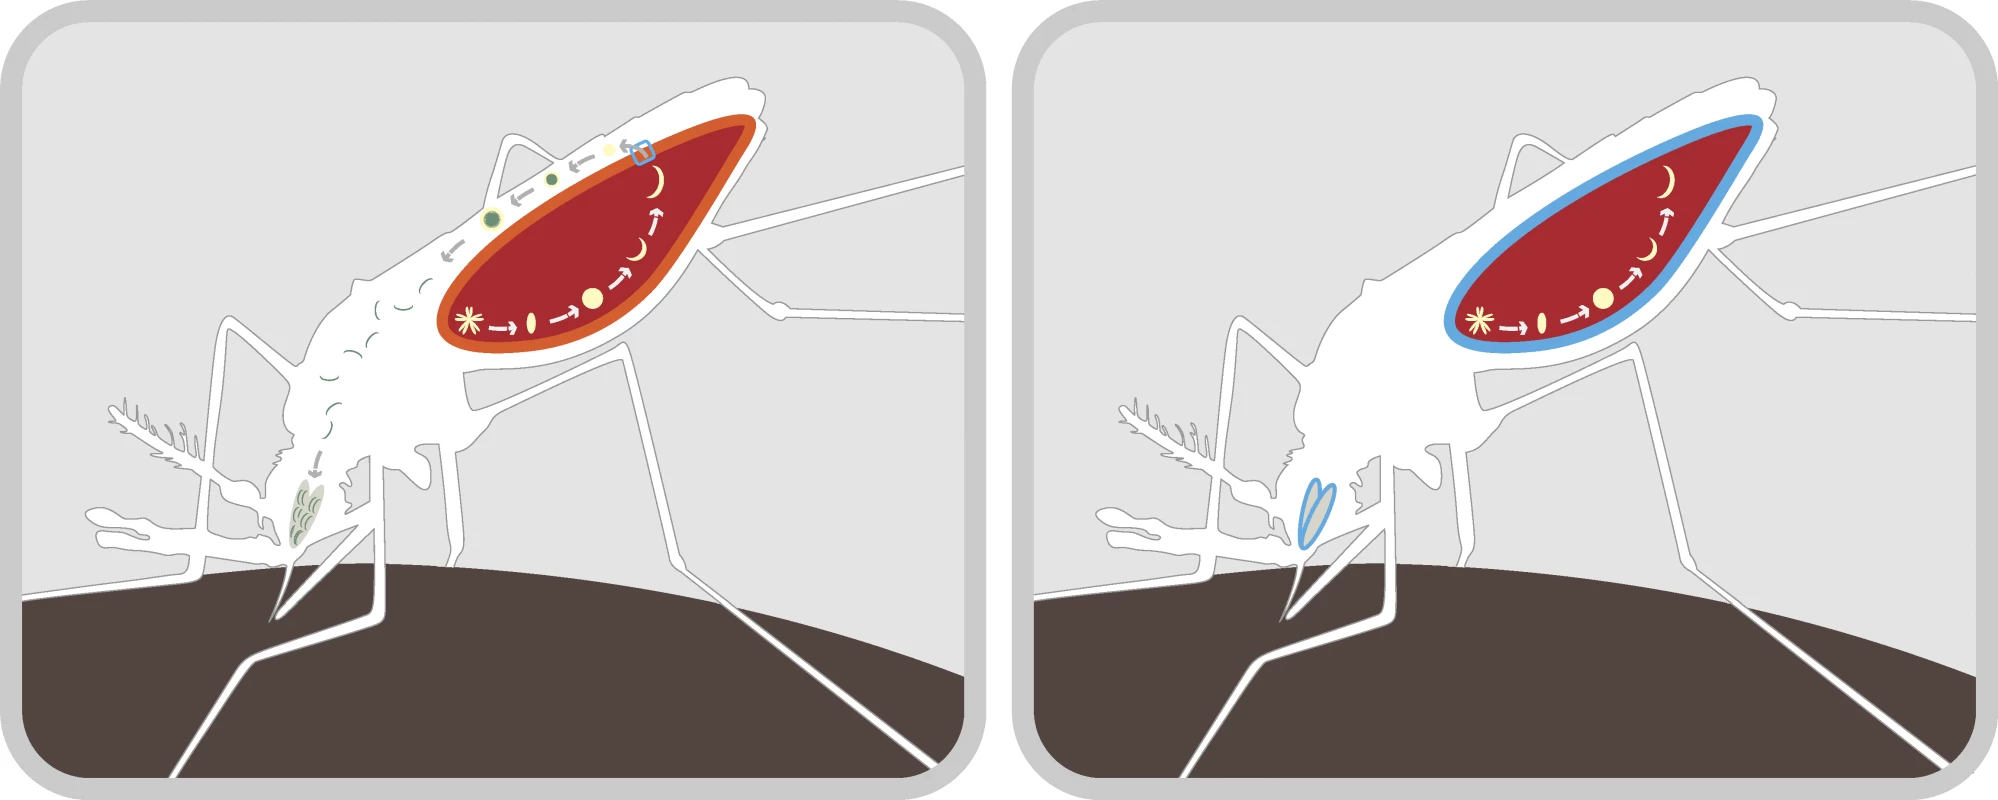 Mechanism for Blocking Malaria Transmission in the Mosquito